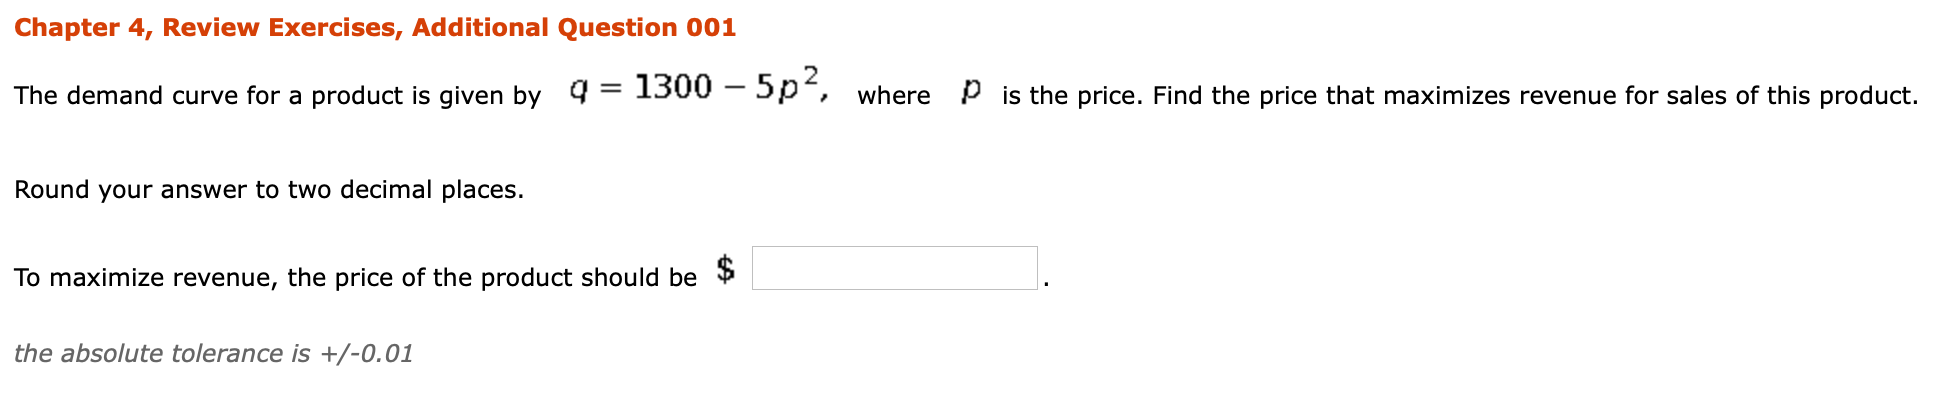 The demand curve for a product is given by 4
1300 – 5p, where p is the price. Find the price that maximizes revenue for sales of this product
Round your answer to two decimal places.
To maximize revenue, the price of the product should be
